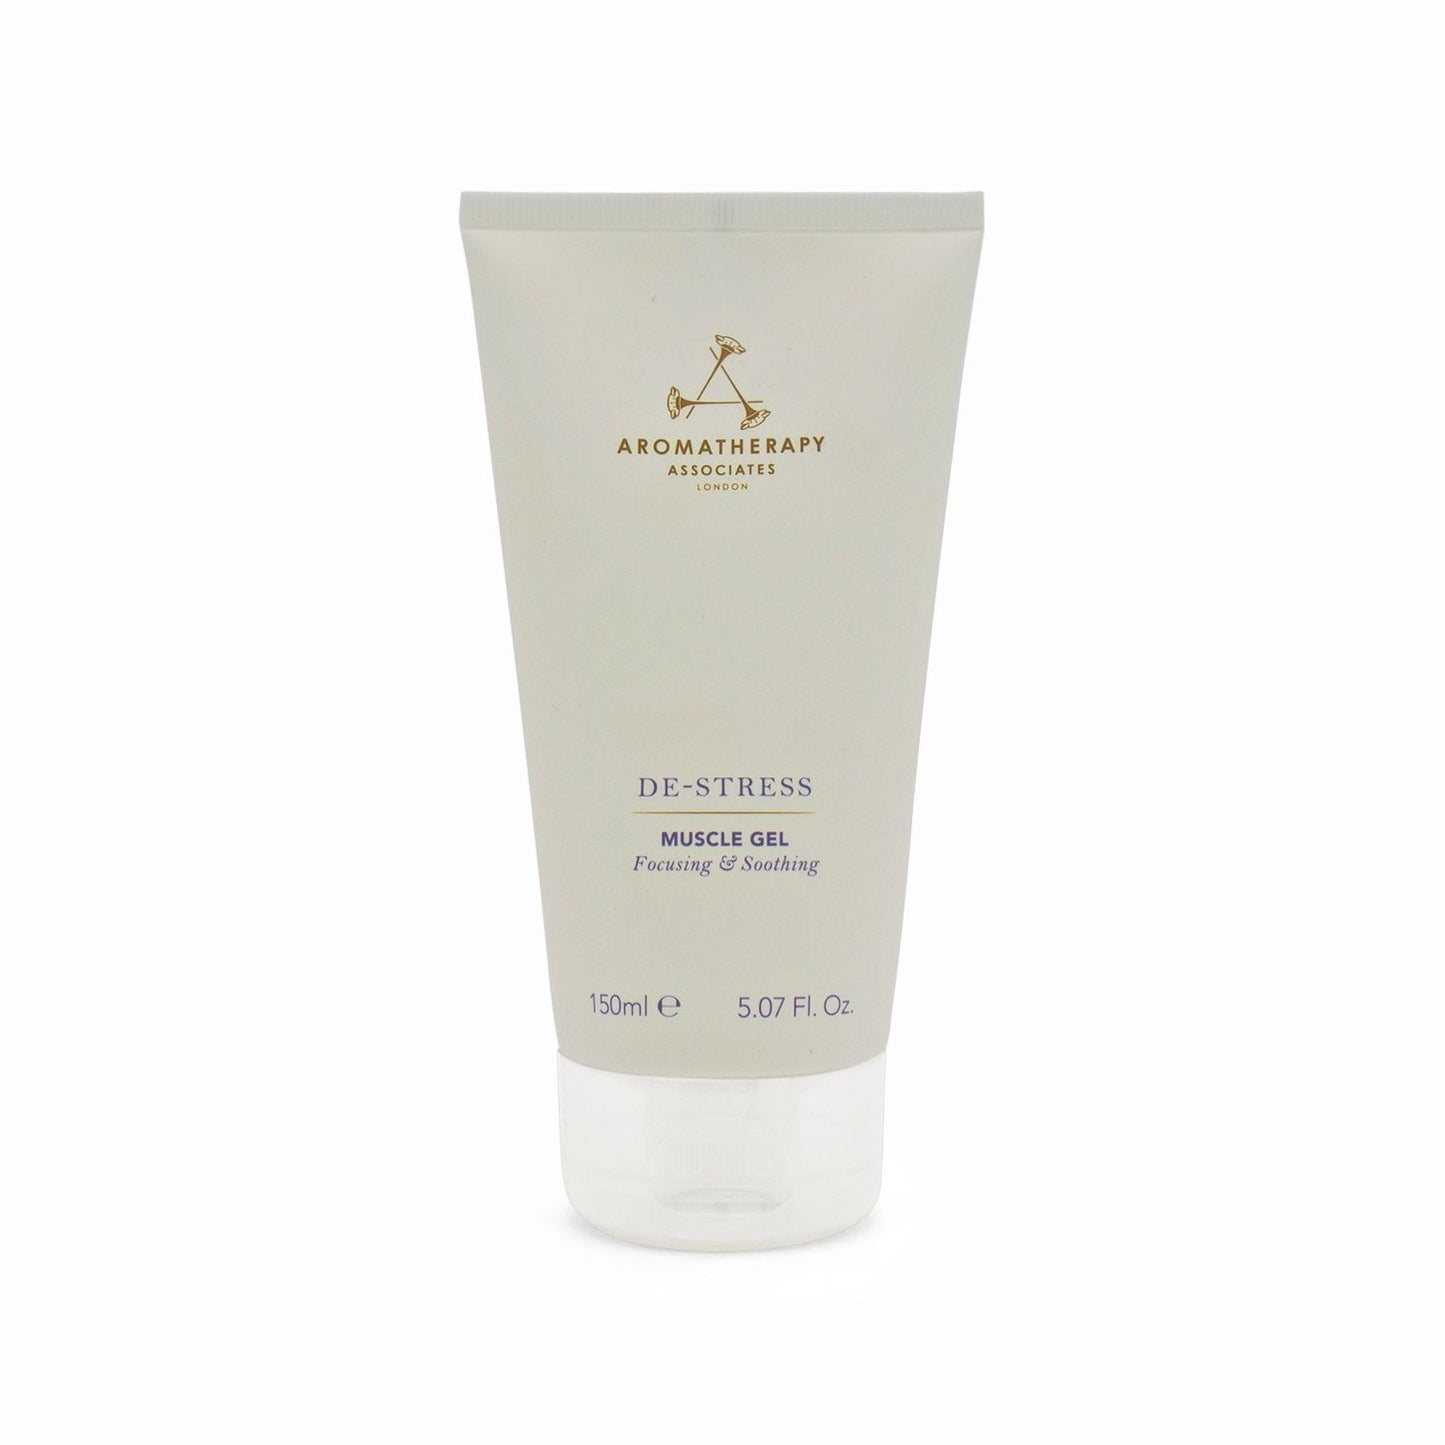 Aromatherapy Associates De-Stress Muscle Gel 150ml - Imperfect Container